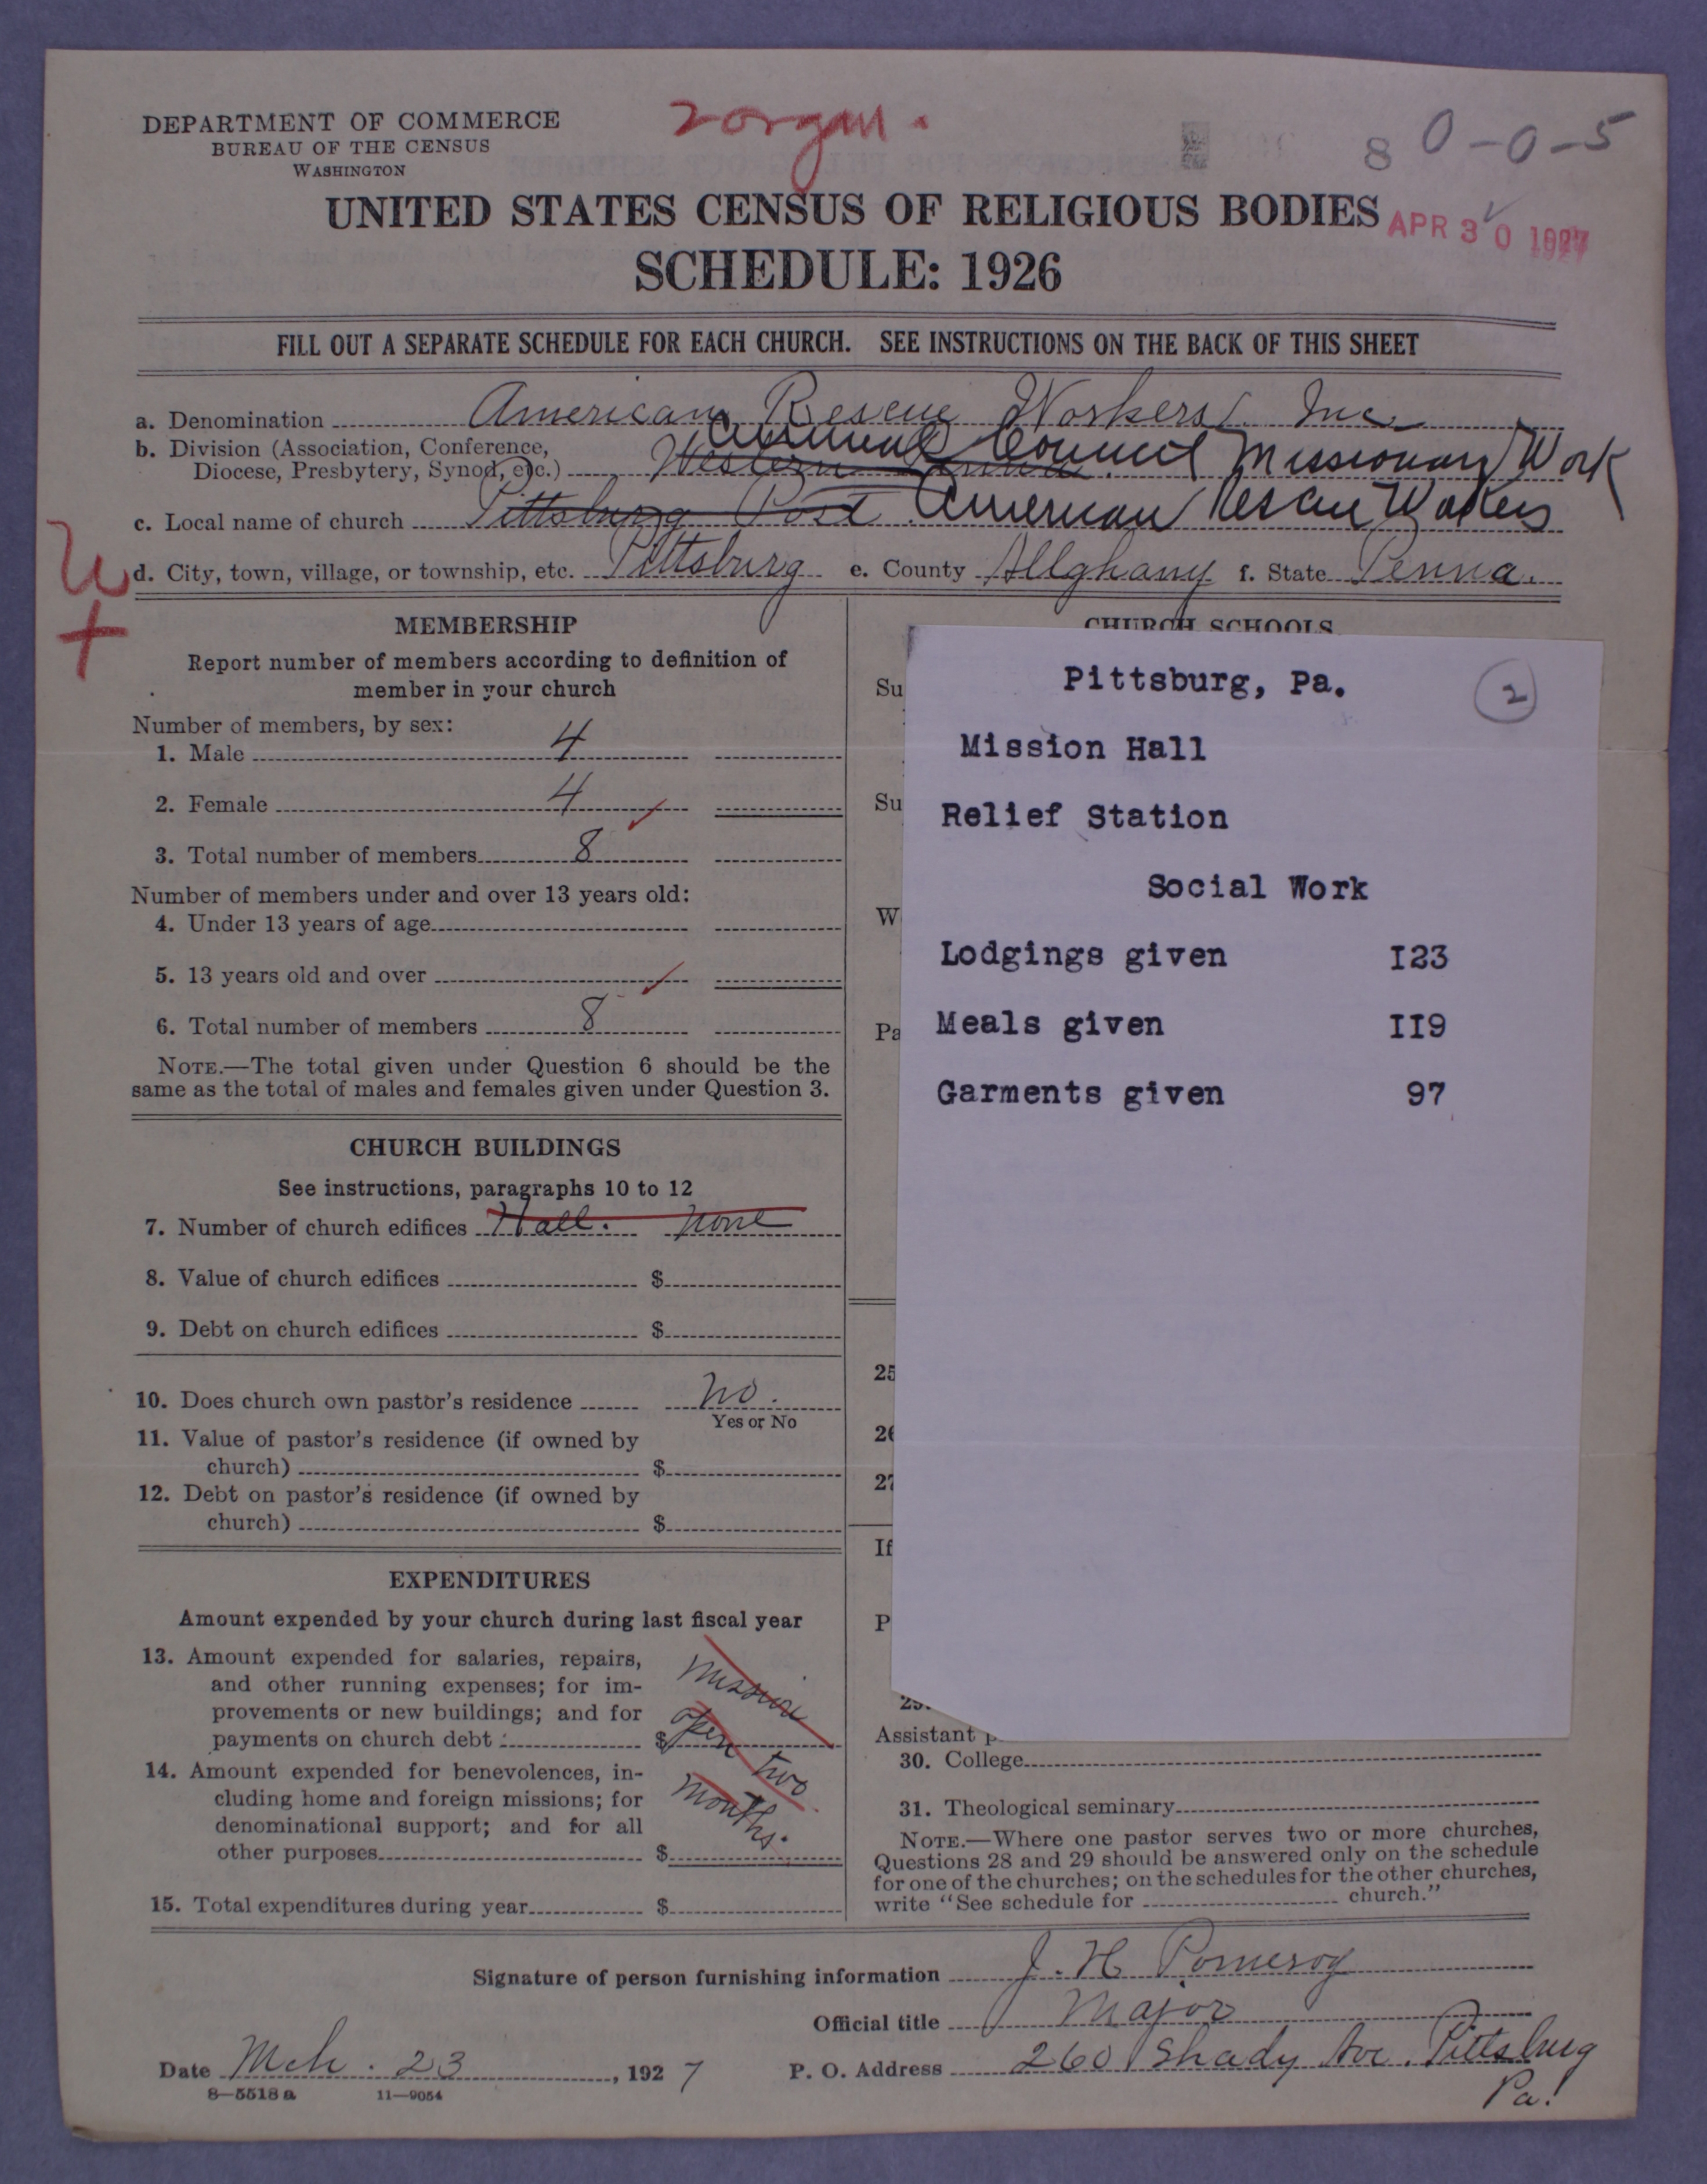 Figure 1. Schedule for the American Rescue Workers in Pittsburg, PA. Similar to other schedules for this denomination, this congregation has pasted a note over top of the part of the form that asked for information about church schools and pastor(s), and has instead listed the type of organizations they sponsored (a mission hall and relief station) and enumerated the specific types of social work they undertook, including giving 123 lodgings, 119 meals and 97 garments.